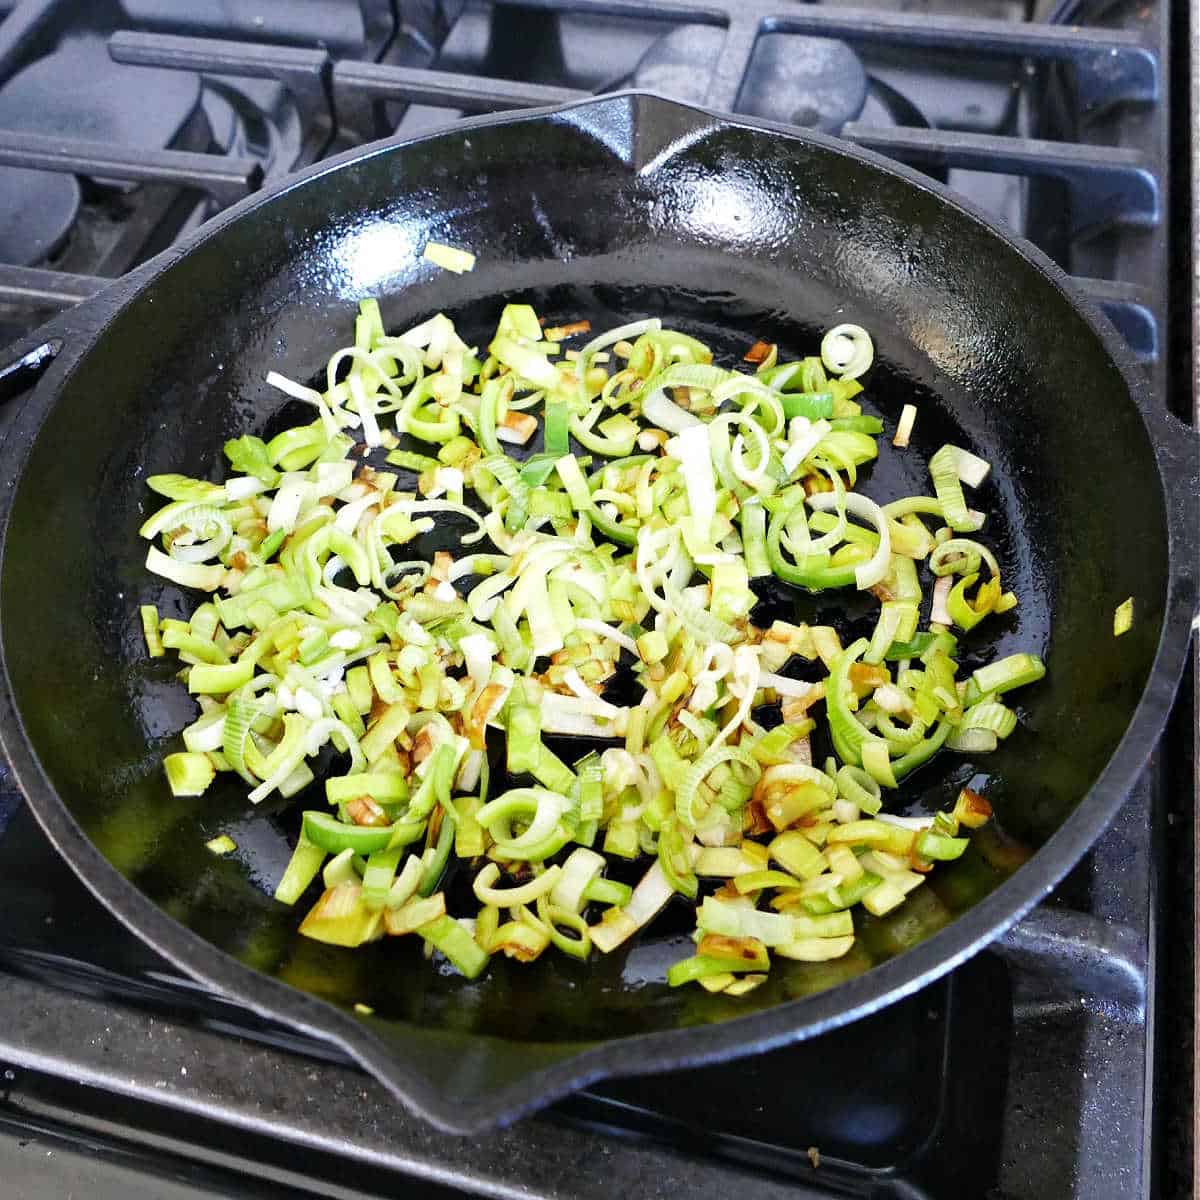 sliced leeks cooking in oil in a cast iron skillet